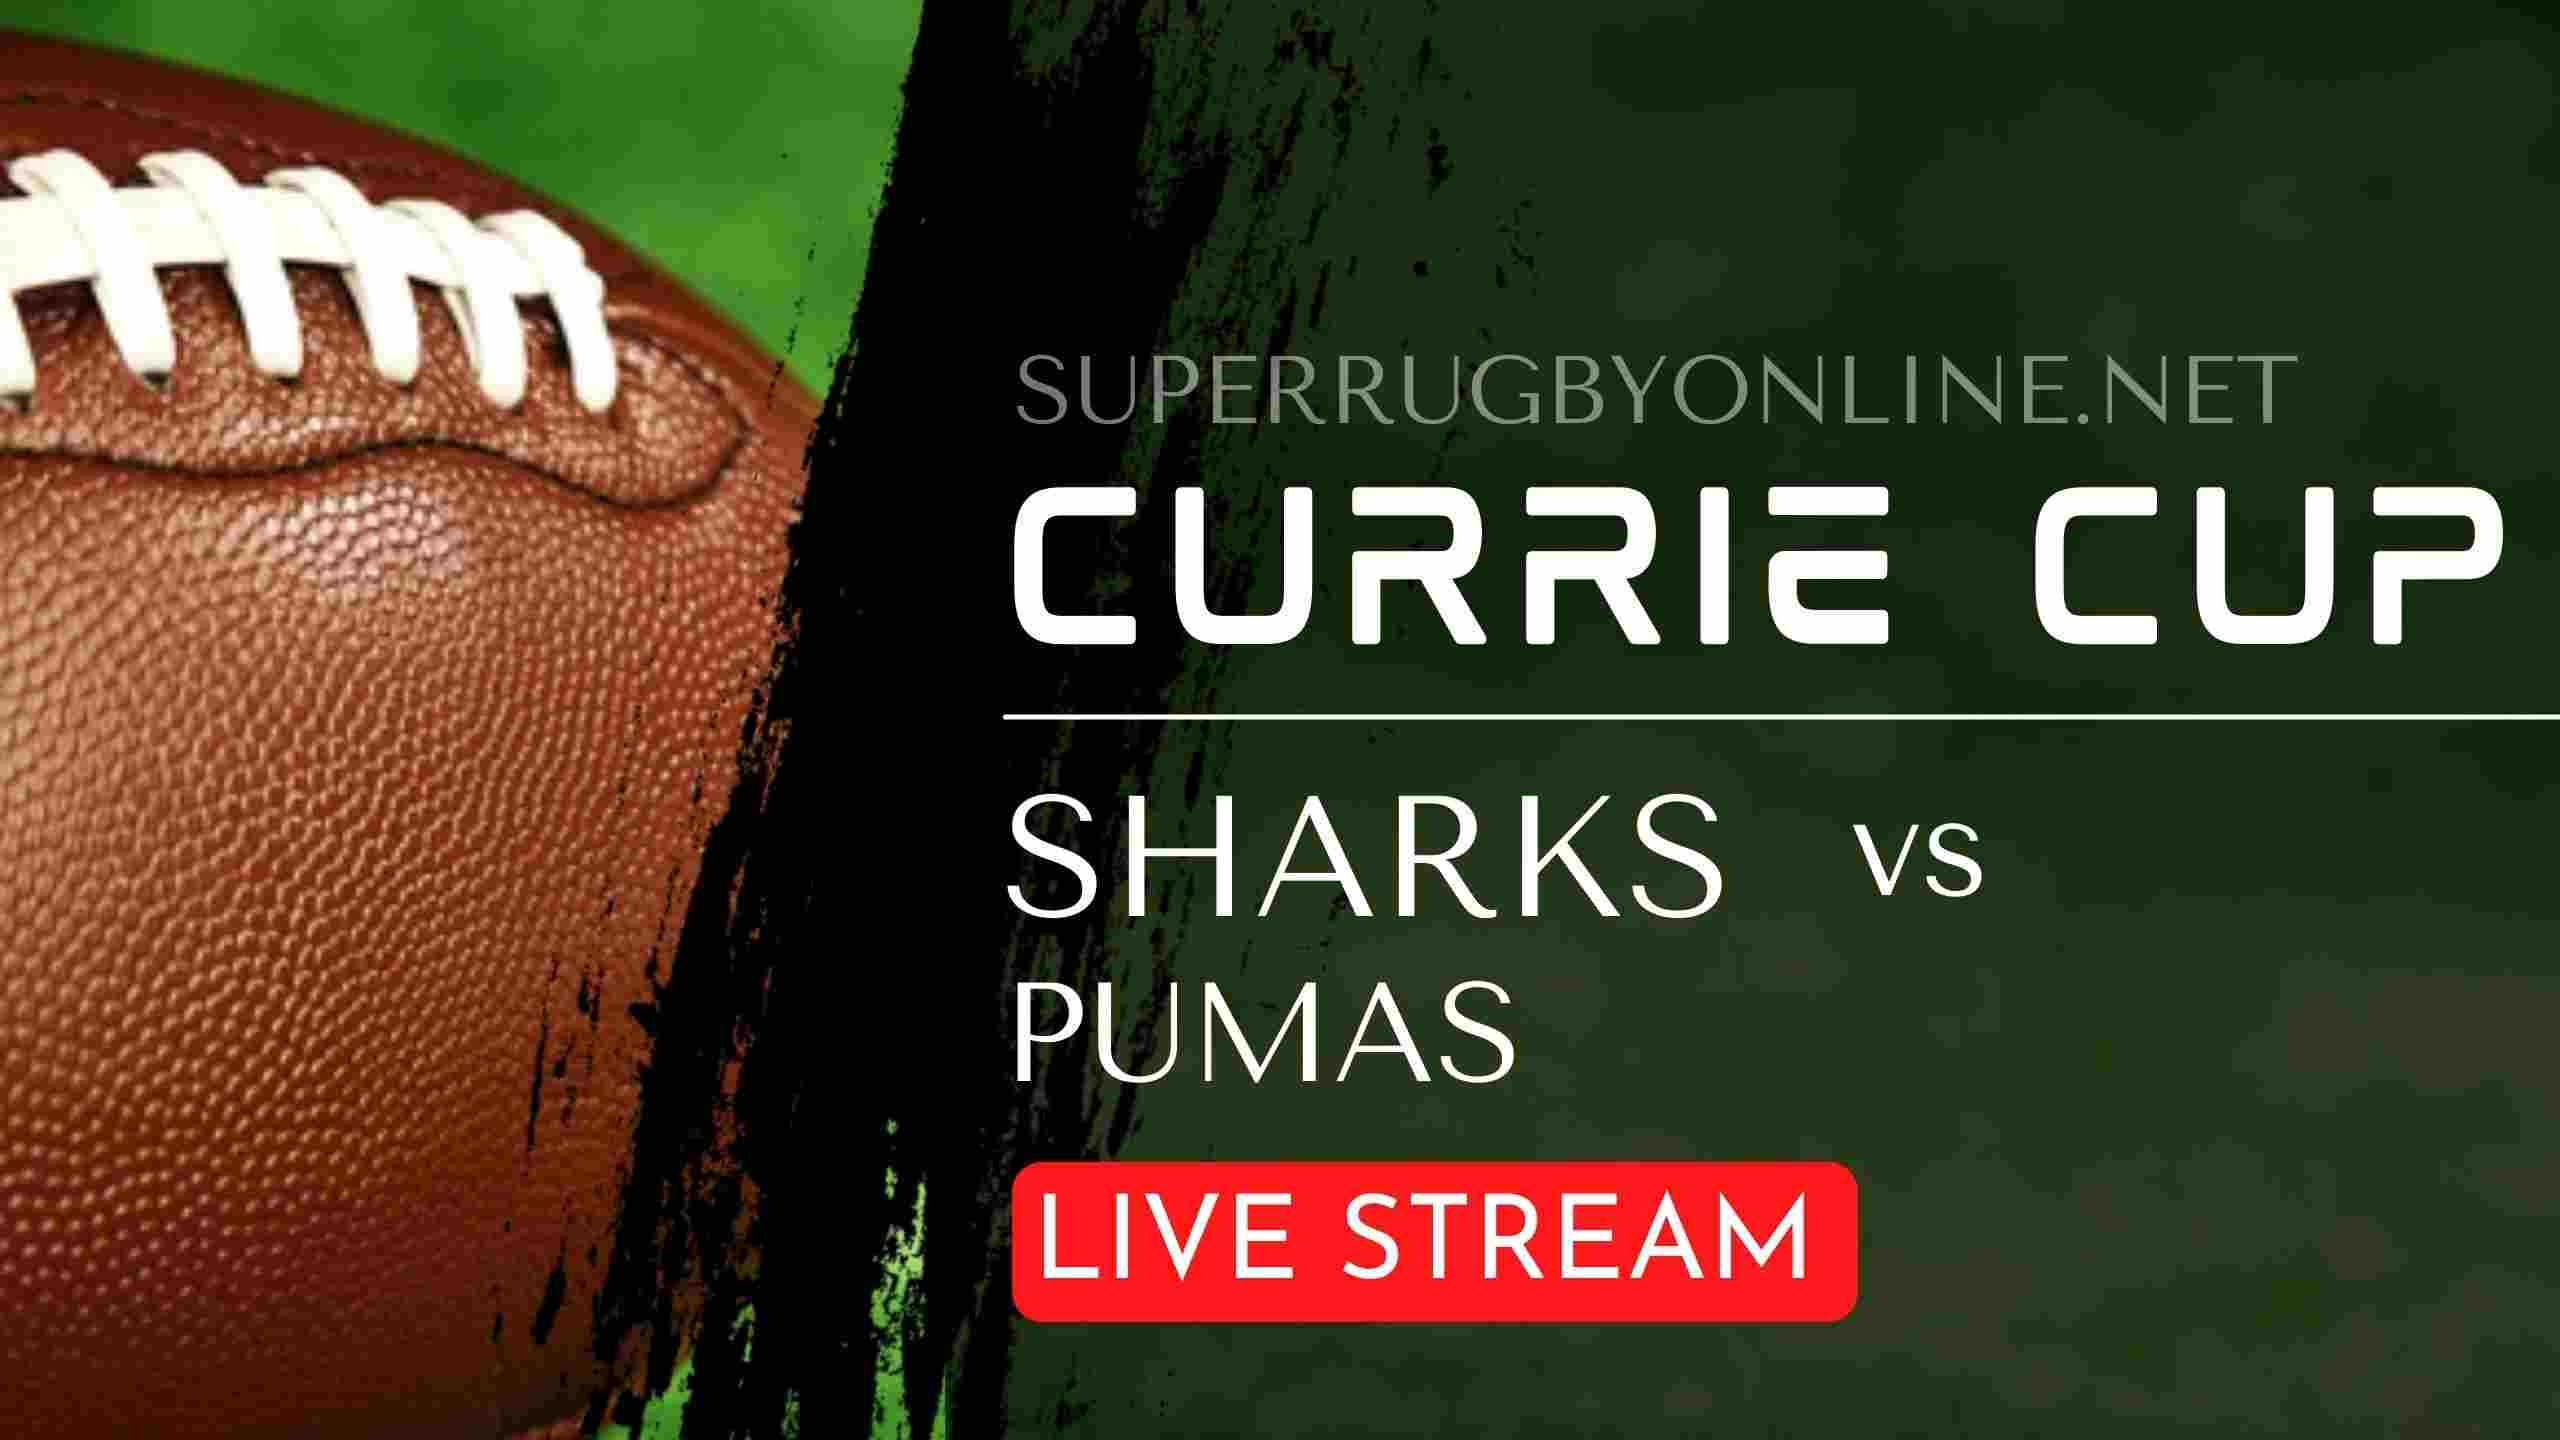 pumas-vs-sharks-full-rugby-matches-live-online